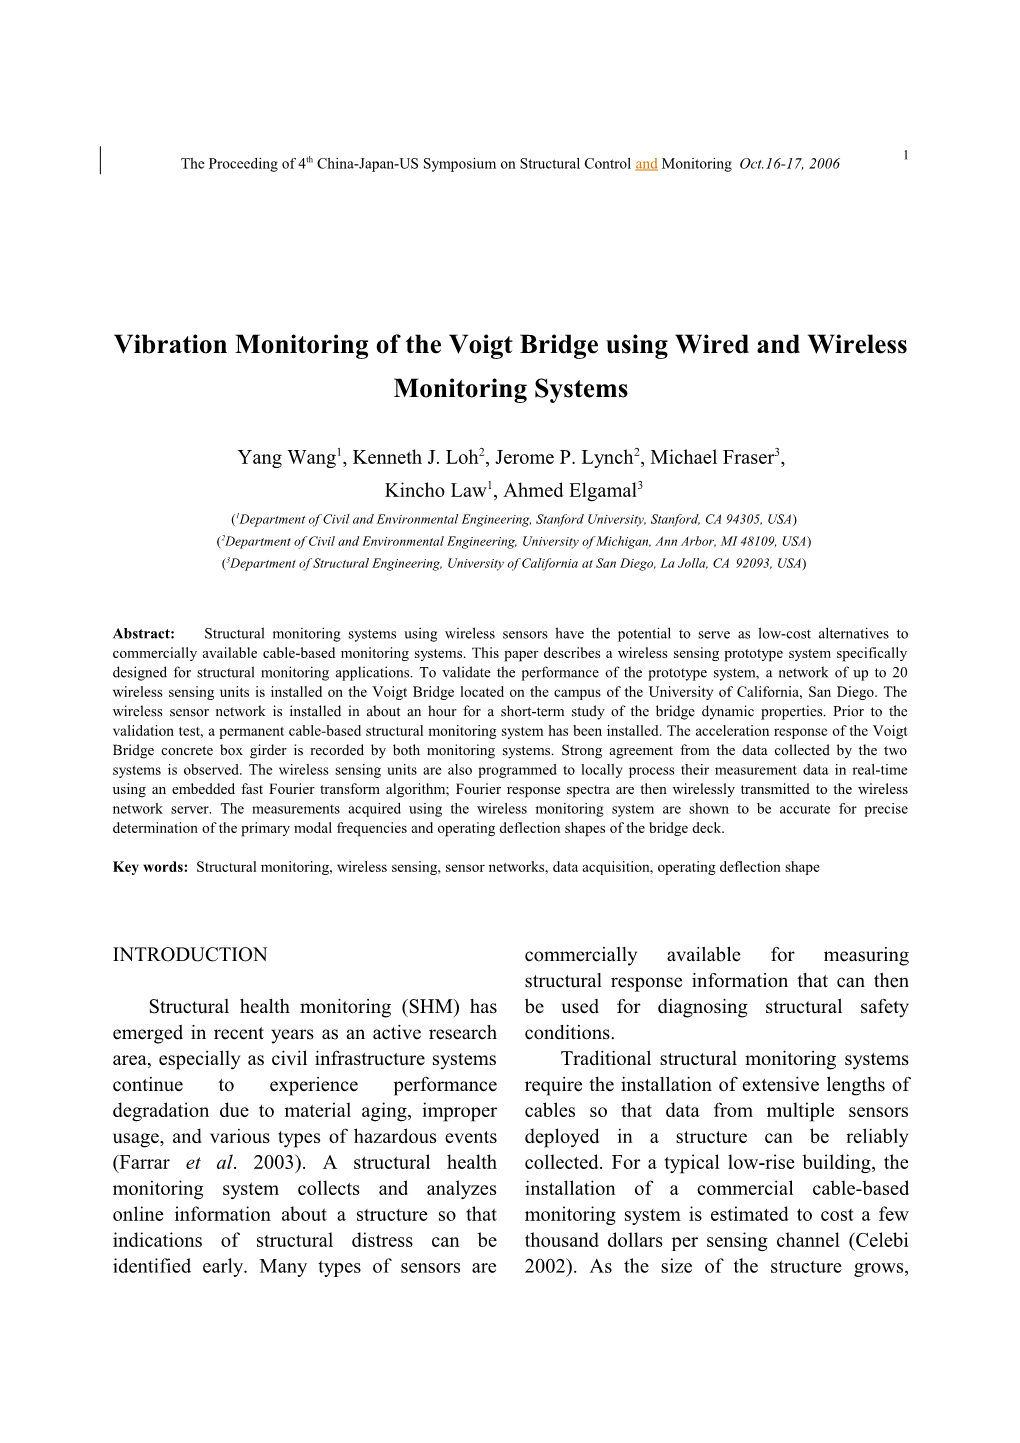 Vibration Monitoring of the Voigt Bridge Using Wired and Wireless Monitoring Systems